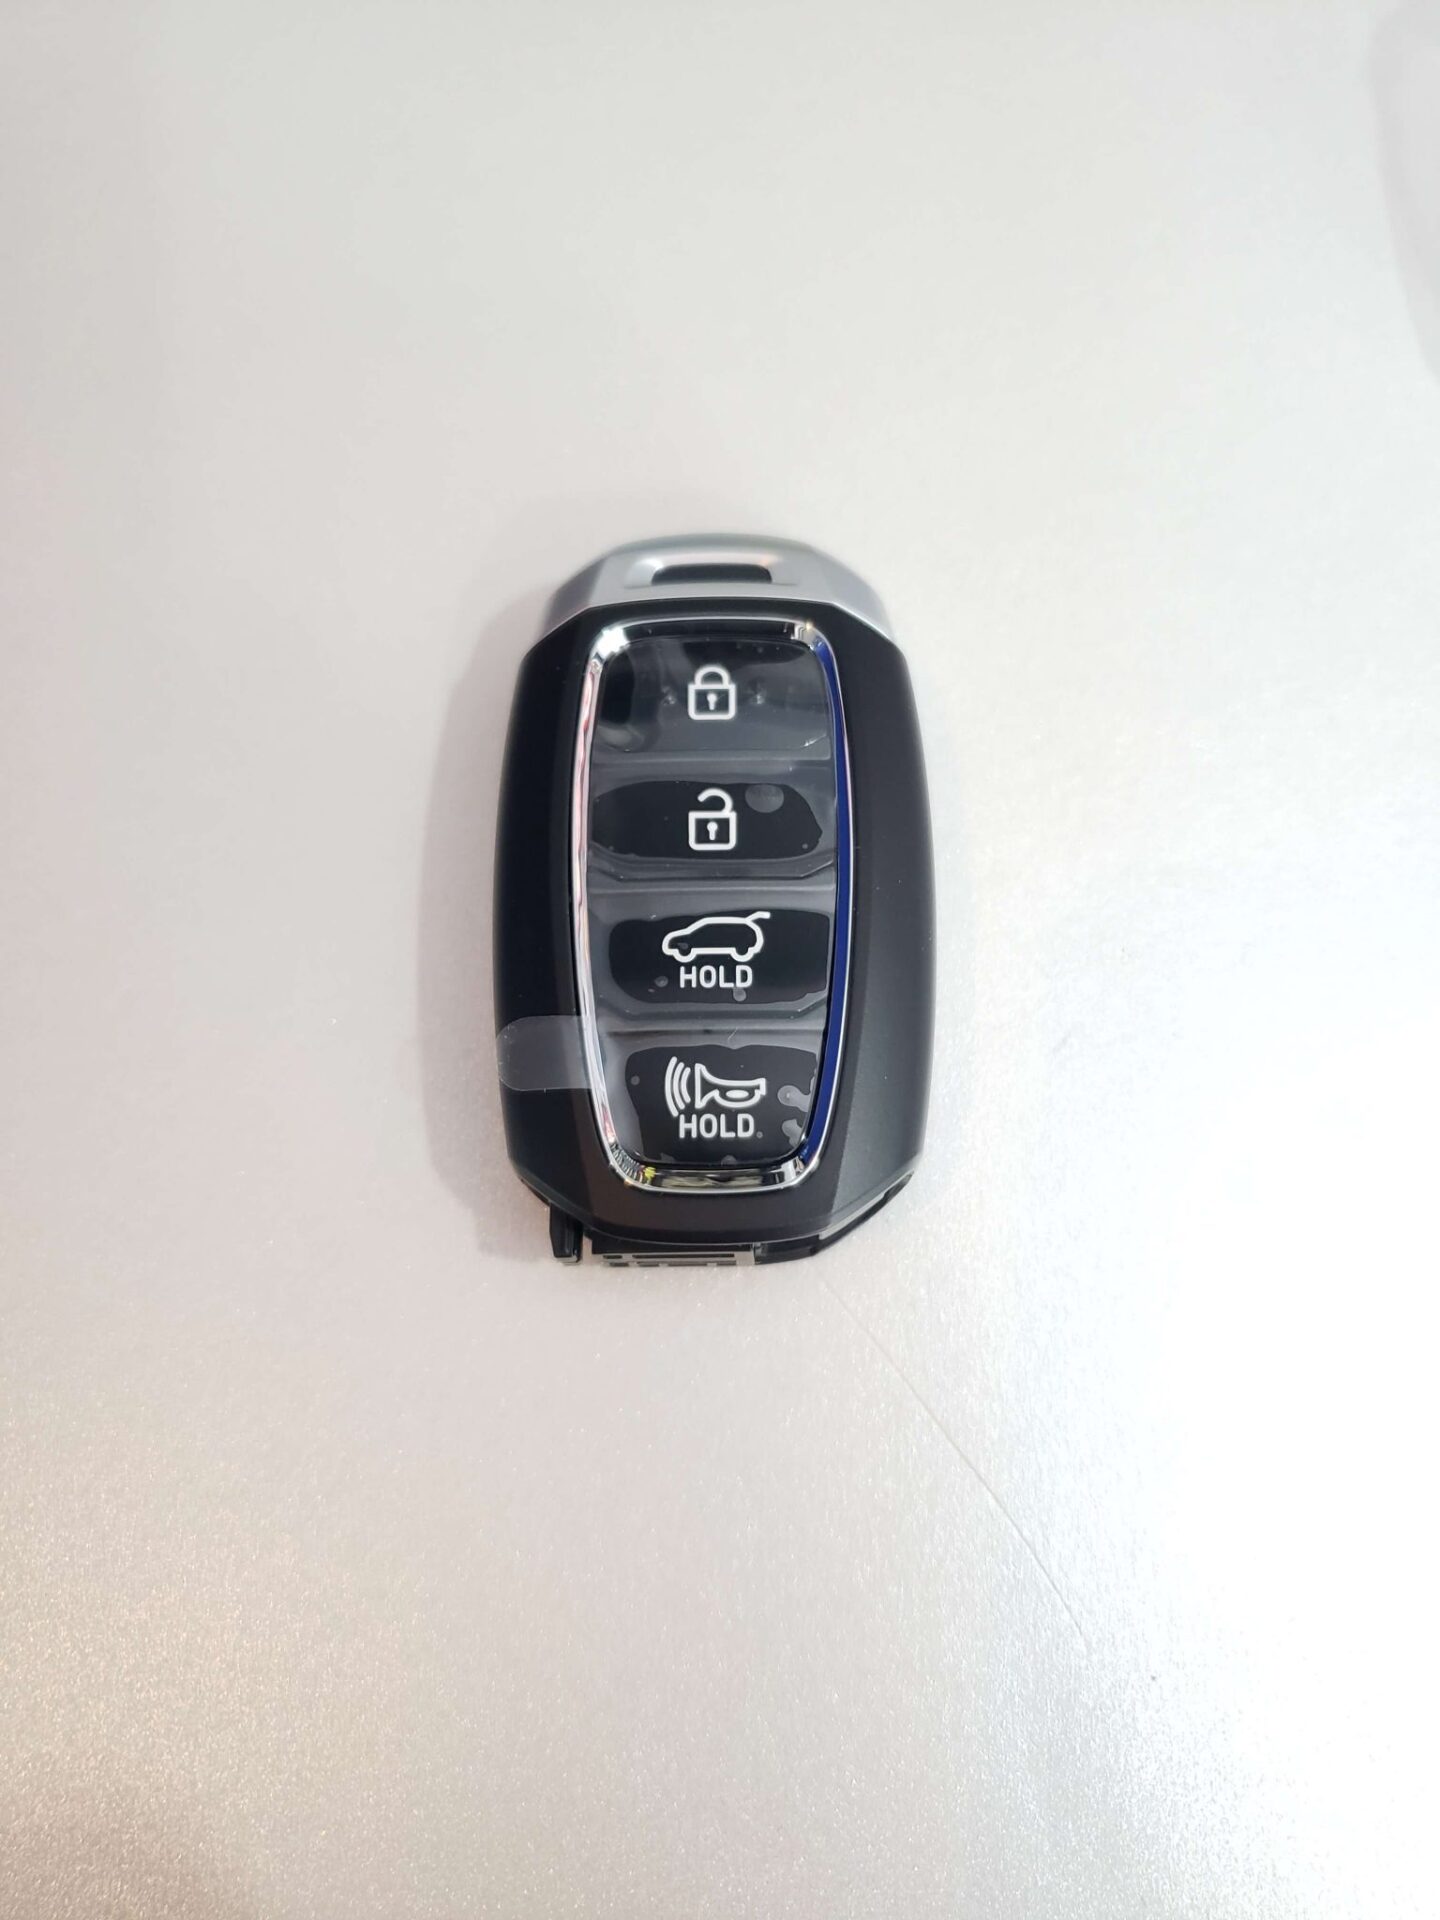 Hyundai Elantra Key Replacement What To Do, Options, Costs & More